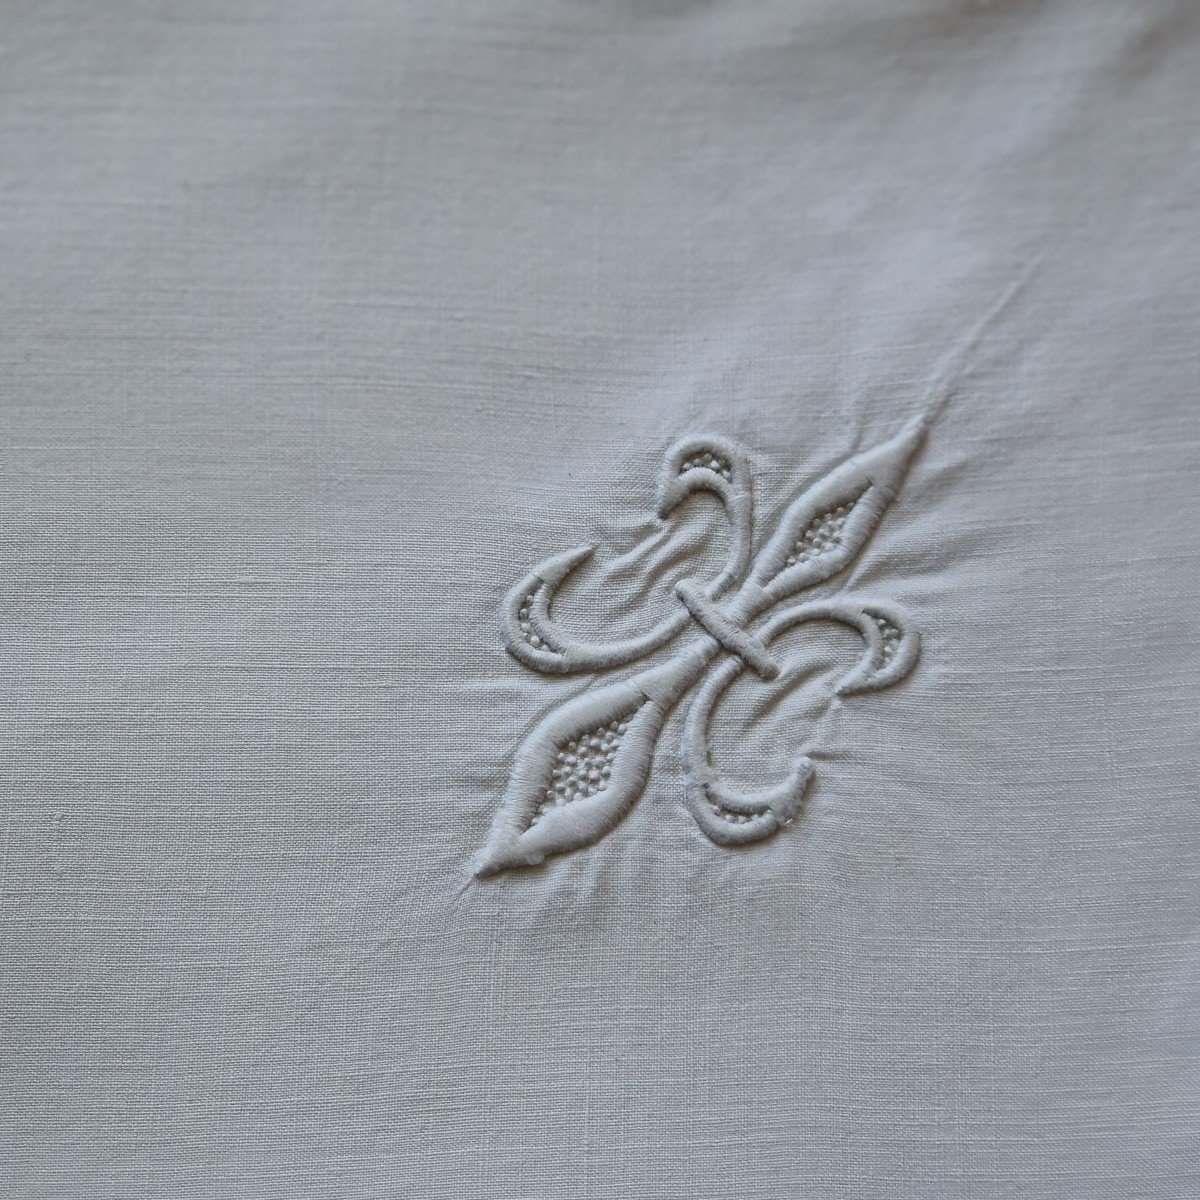 Two Pillowcases With Fleur De Lys, And Rectangular Marquis Crown